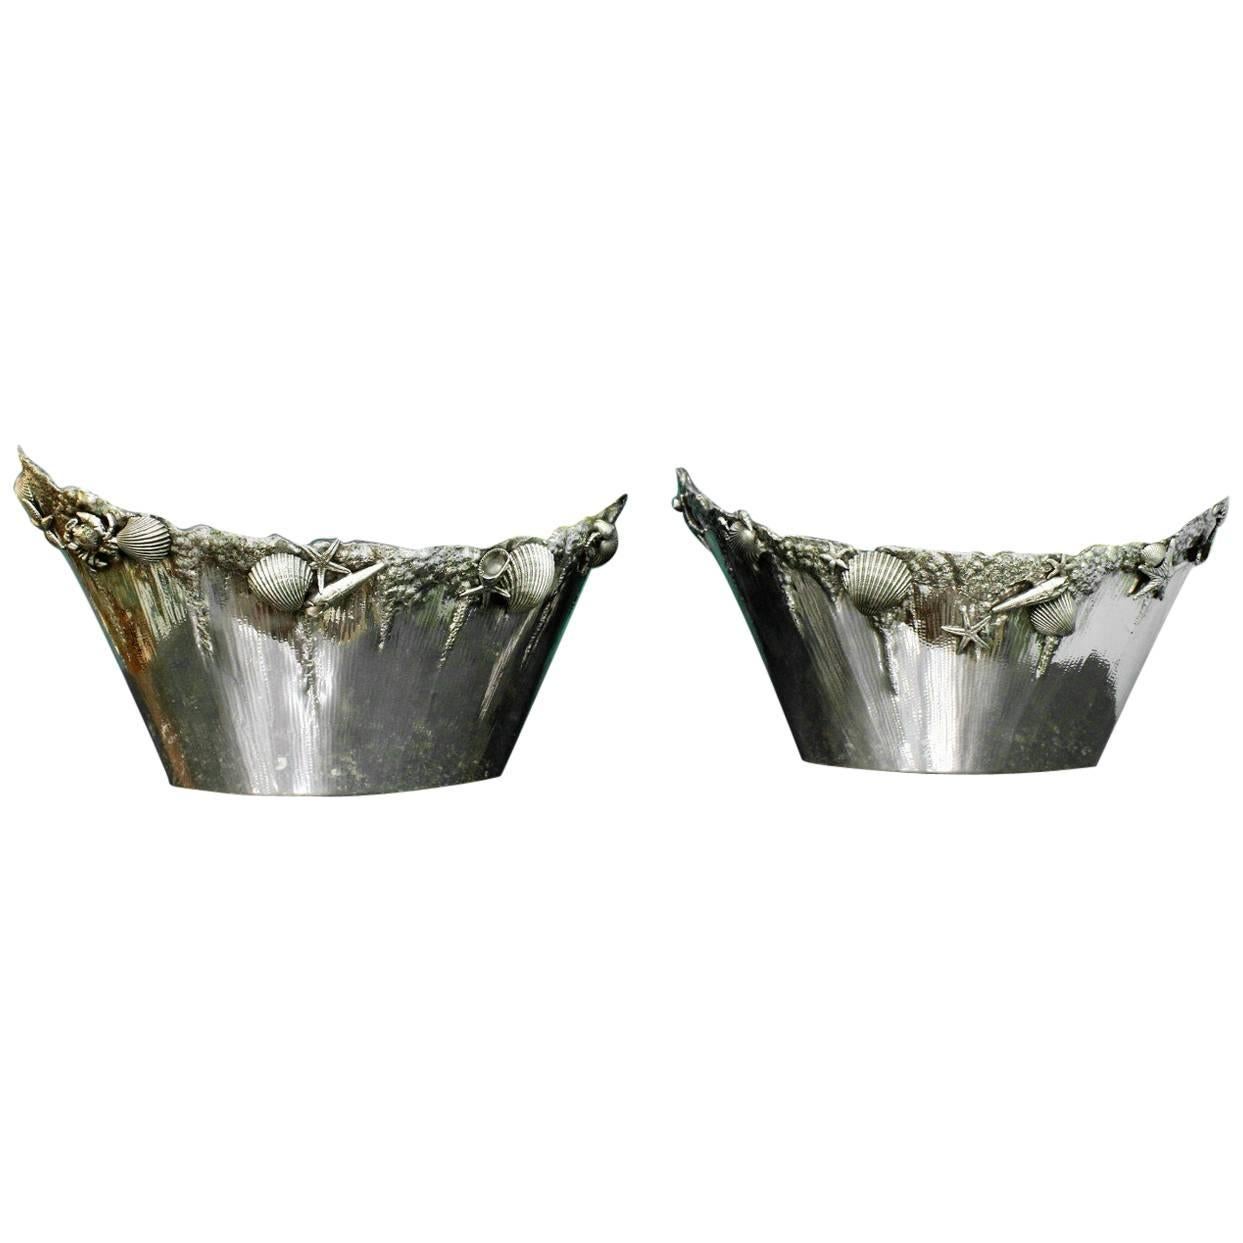 Pair of Giuseppe De Luca 20th Century Silver Rococo Engraved Wine Coolers, 1930s For Sale